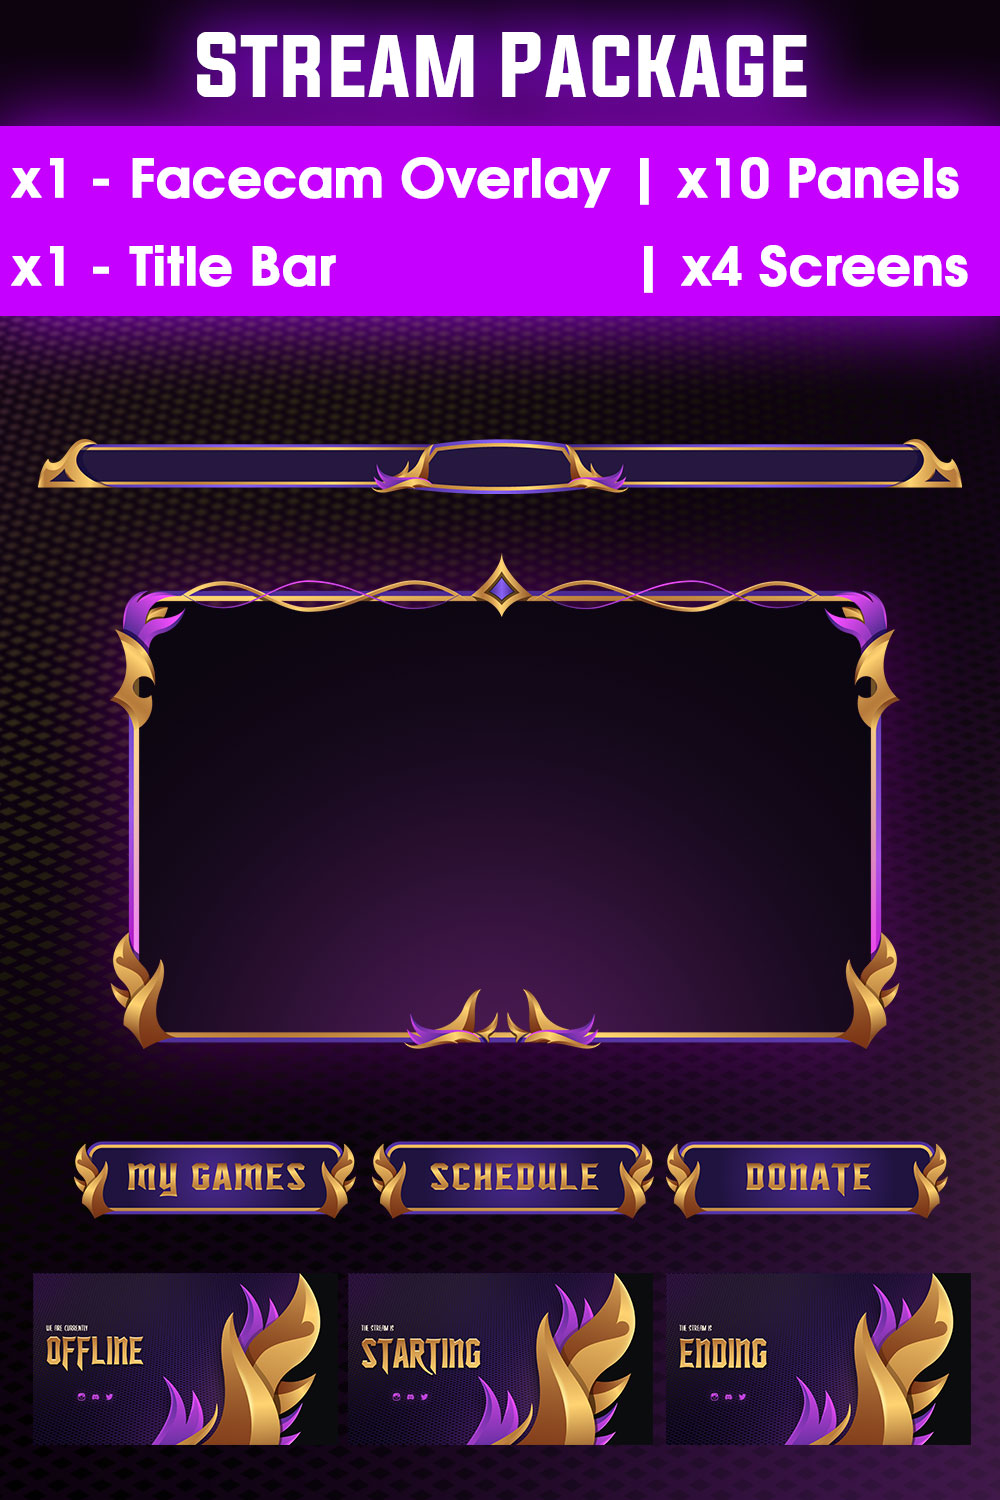 Royal fantasy Stream Overlay pack for Twitch and Youtube in purple pinterest preview image.